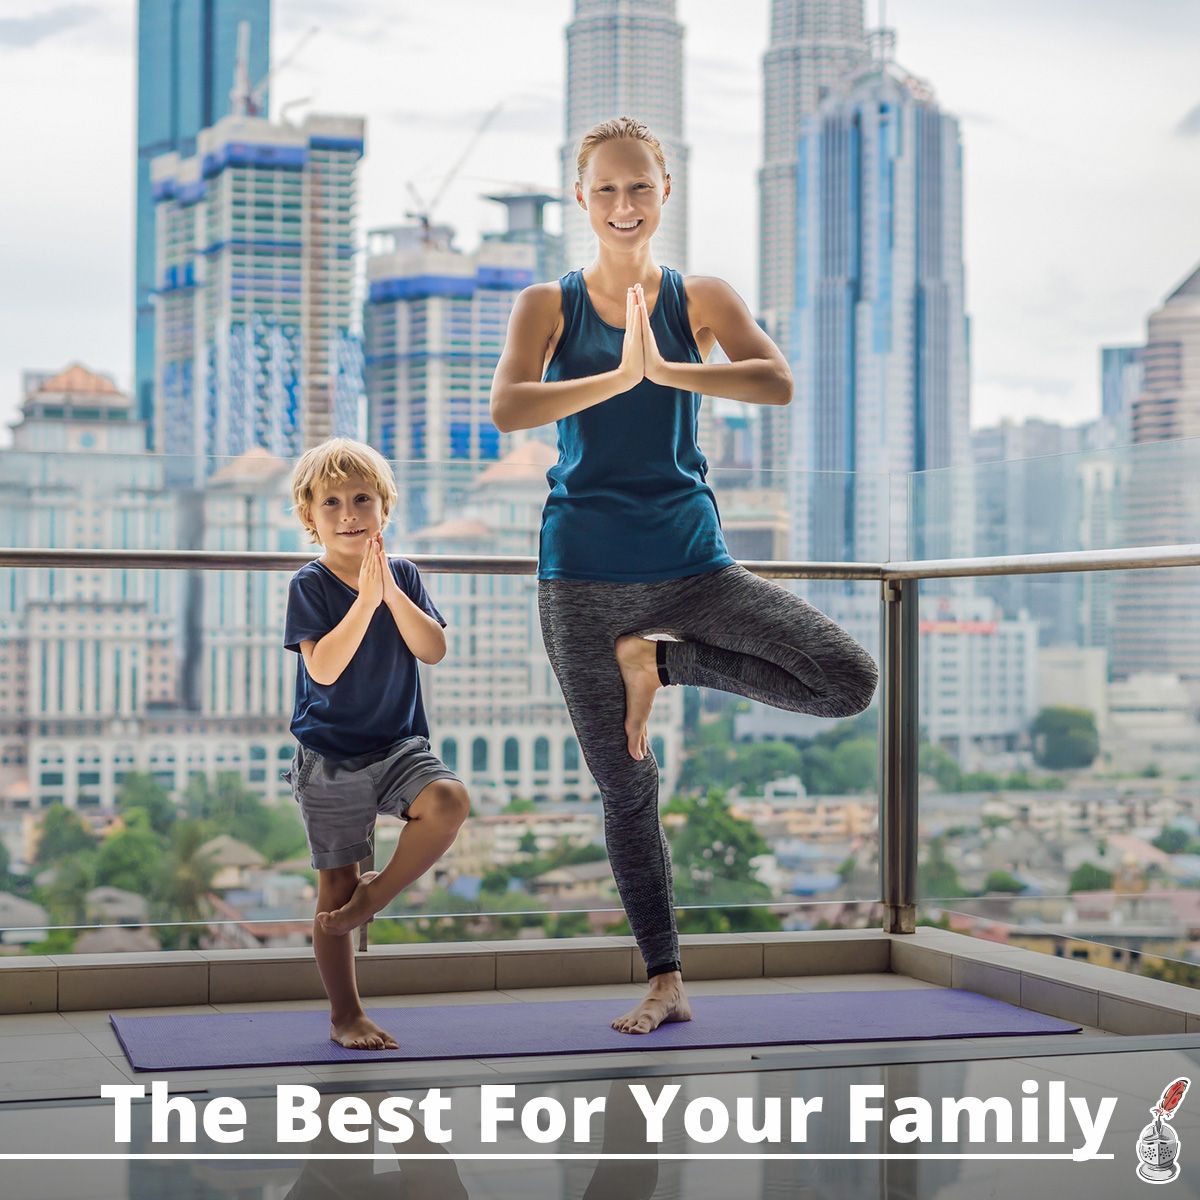 The Best For Your Family